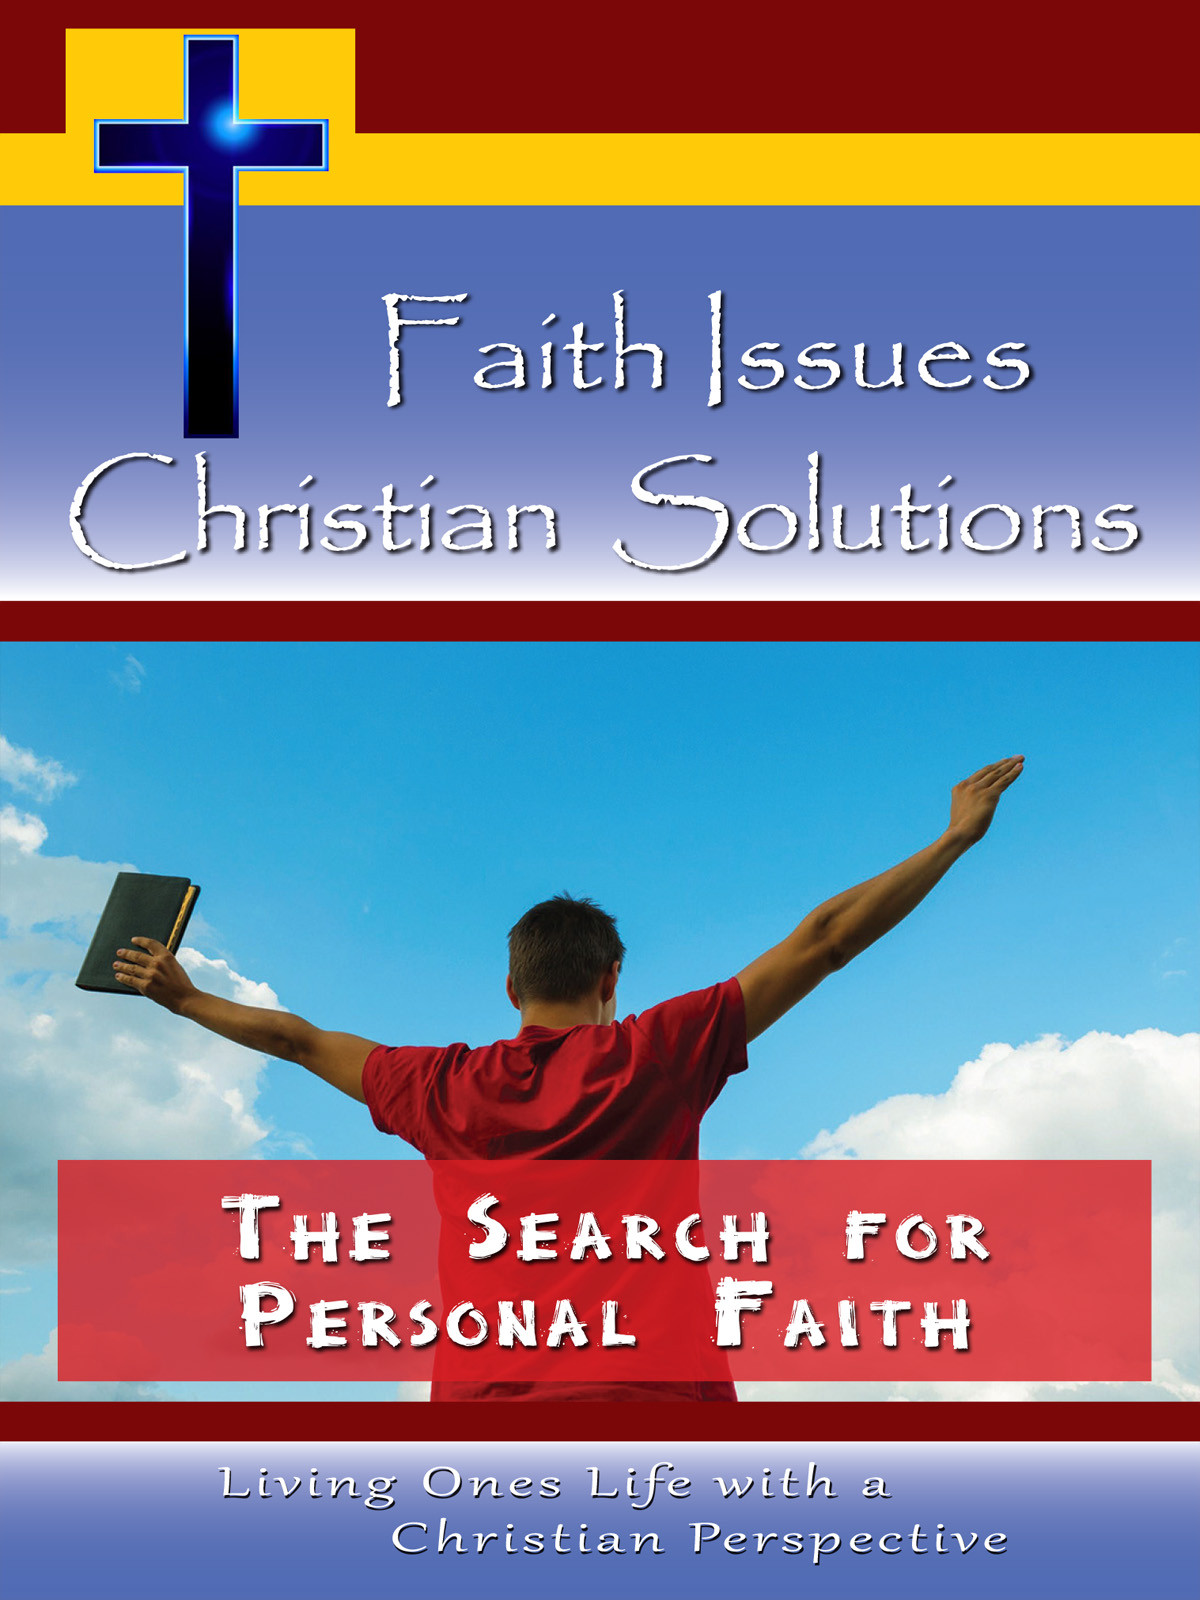 CH10020 - The Search for Personal Faith